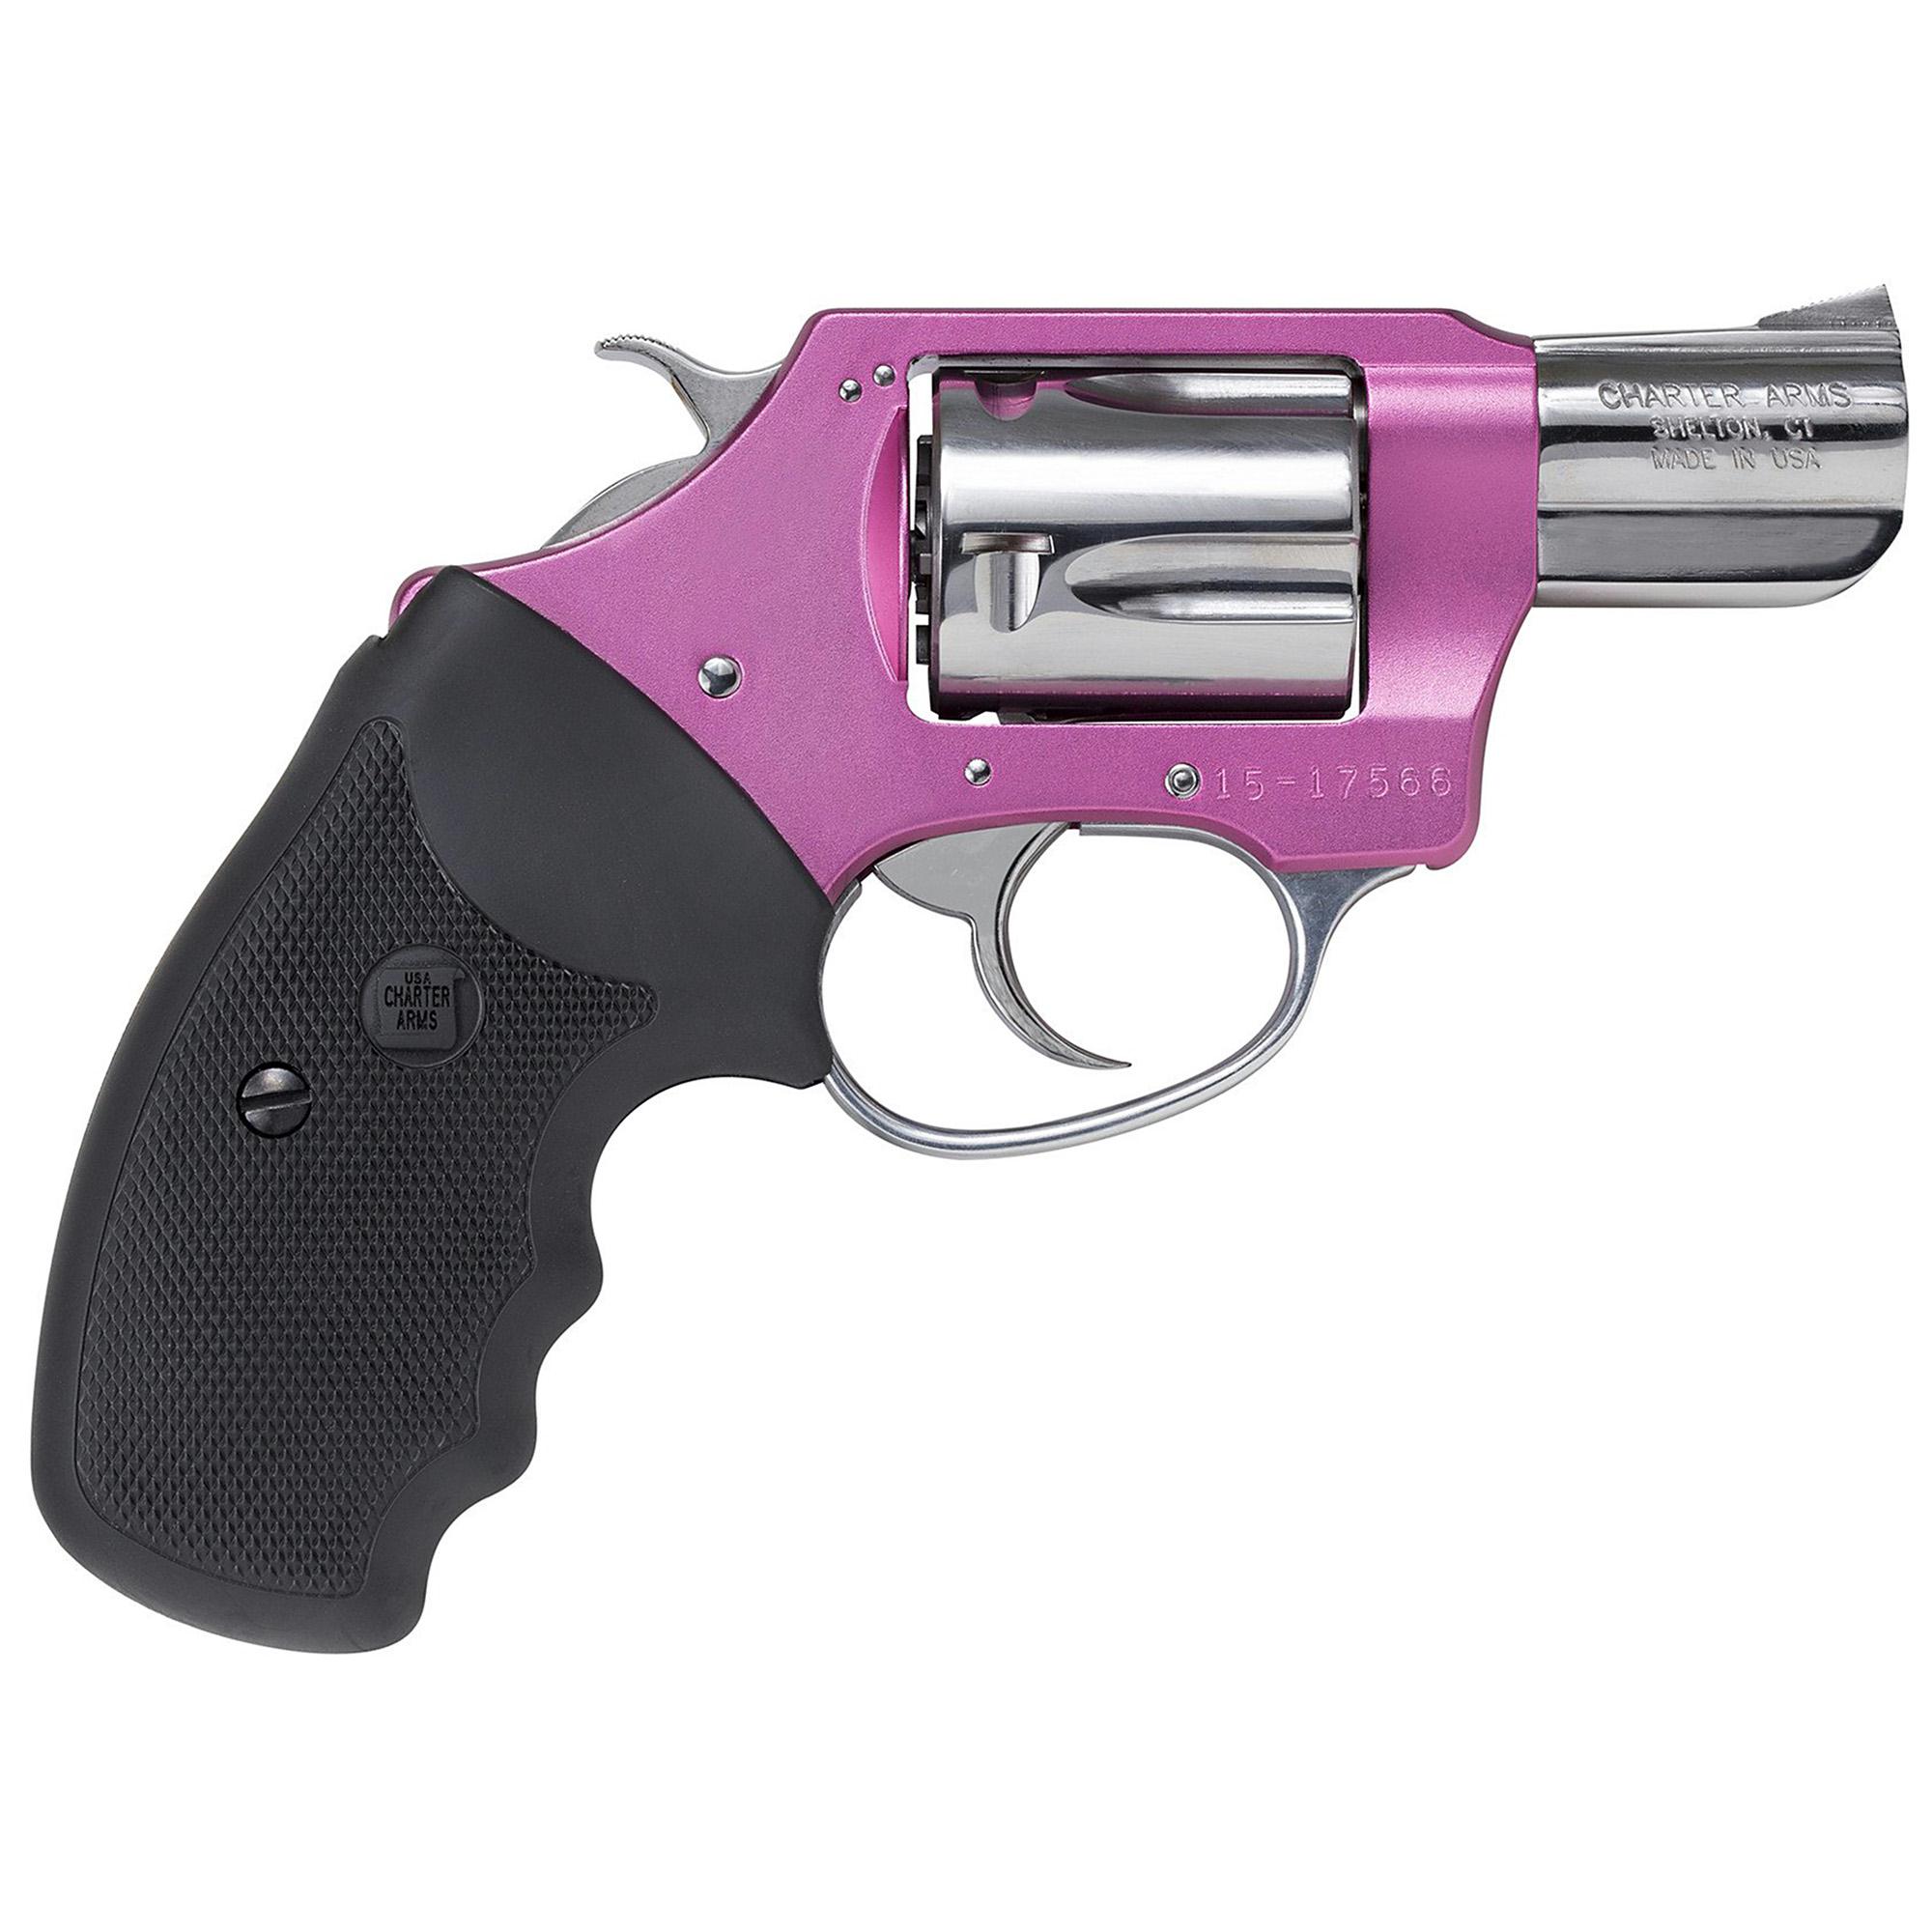 Charter Arms Chic Lady, 38 Special, 2" Barrel, Steel Frame, Pink/polis...